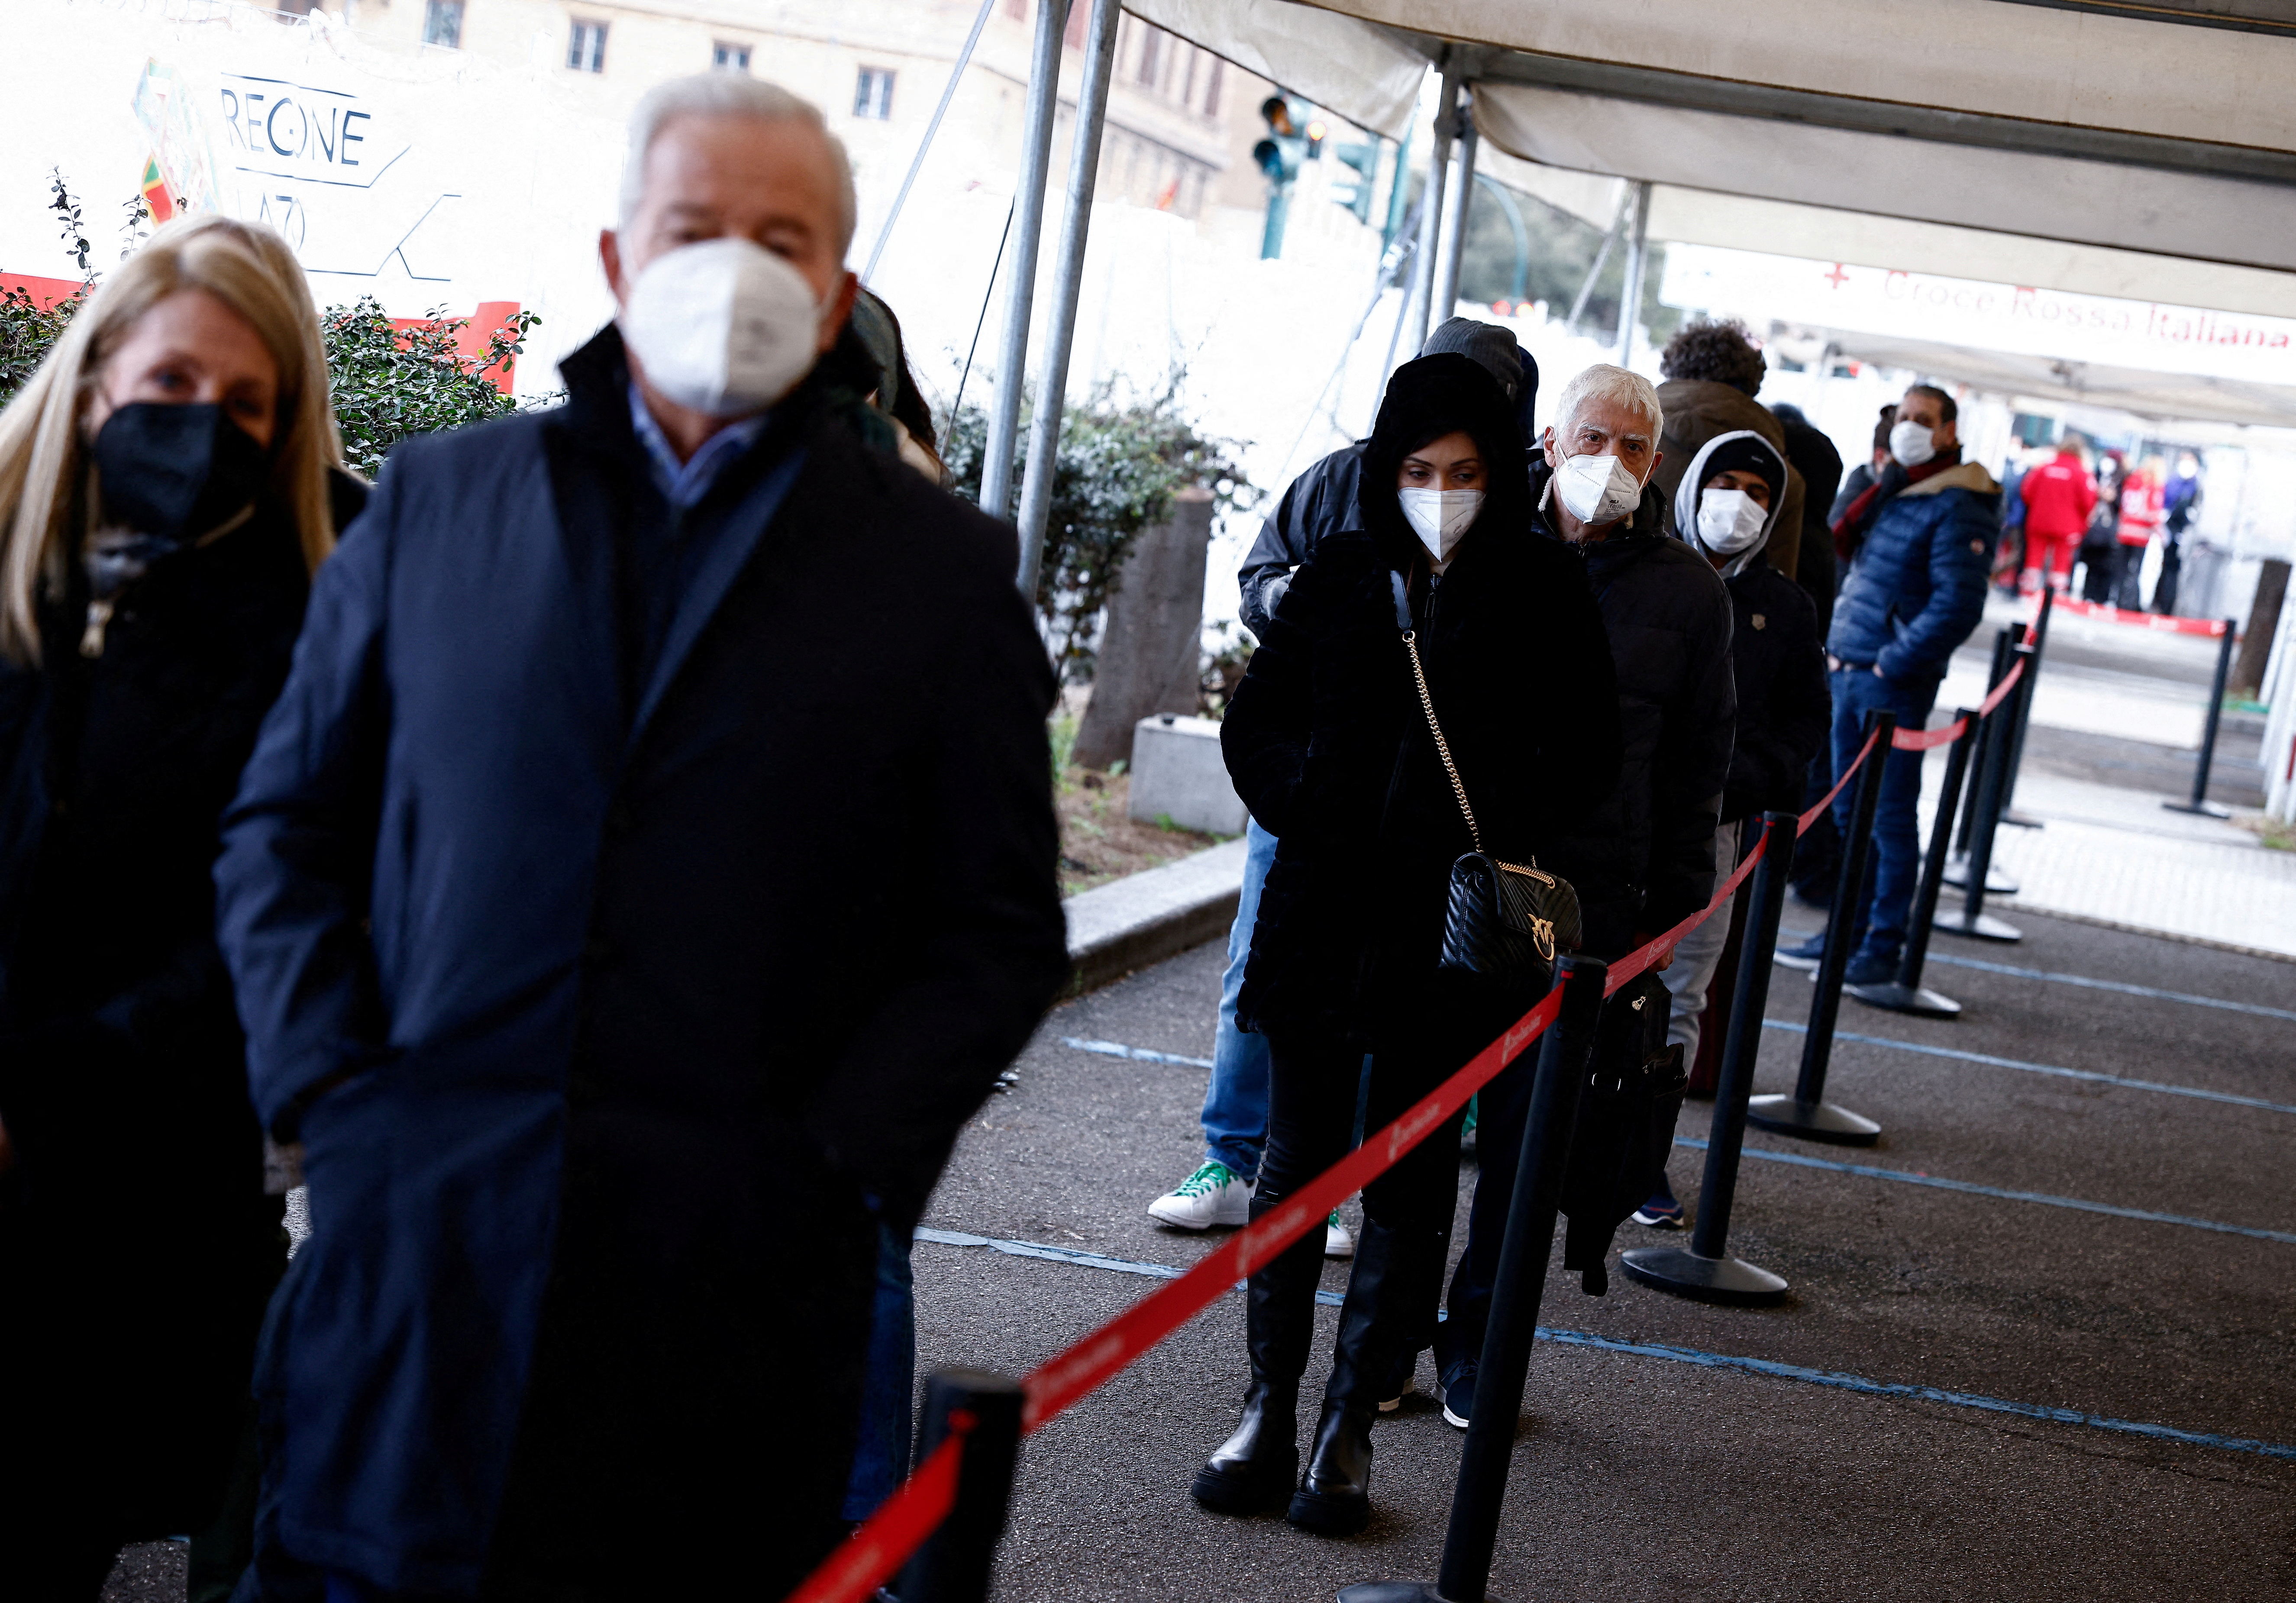 People wait to get a dose of the vaccine against the coronavirus disease (COVID-19), on the day Italy brings in tougher rules for the unvaccinated, at a Red Cross vaccination centre by Termini main train station in Rome, Italy, January 10, 2022. REUTERS/Guglielmo Mangiapane